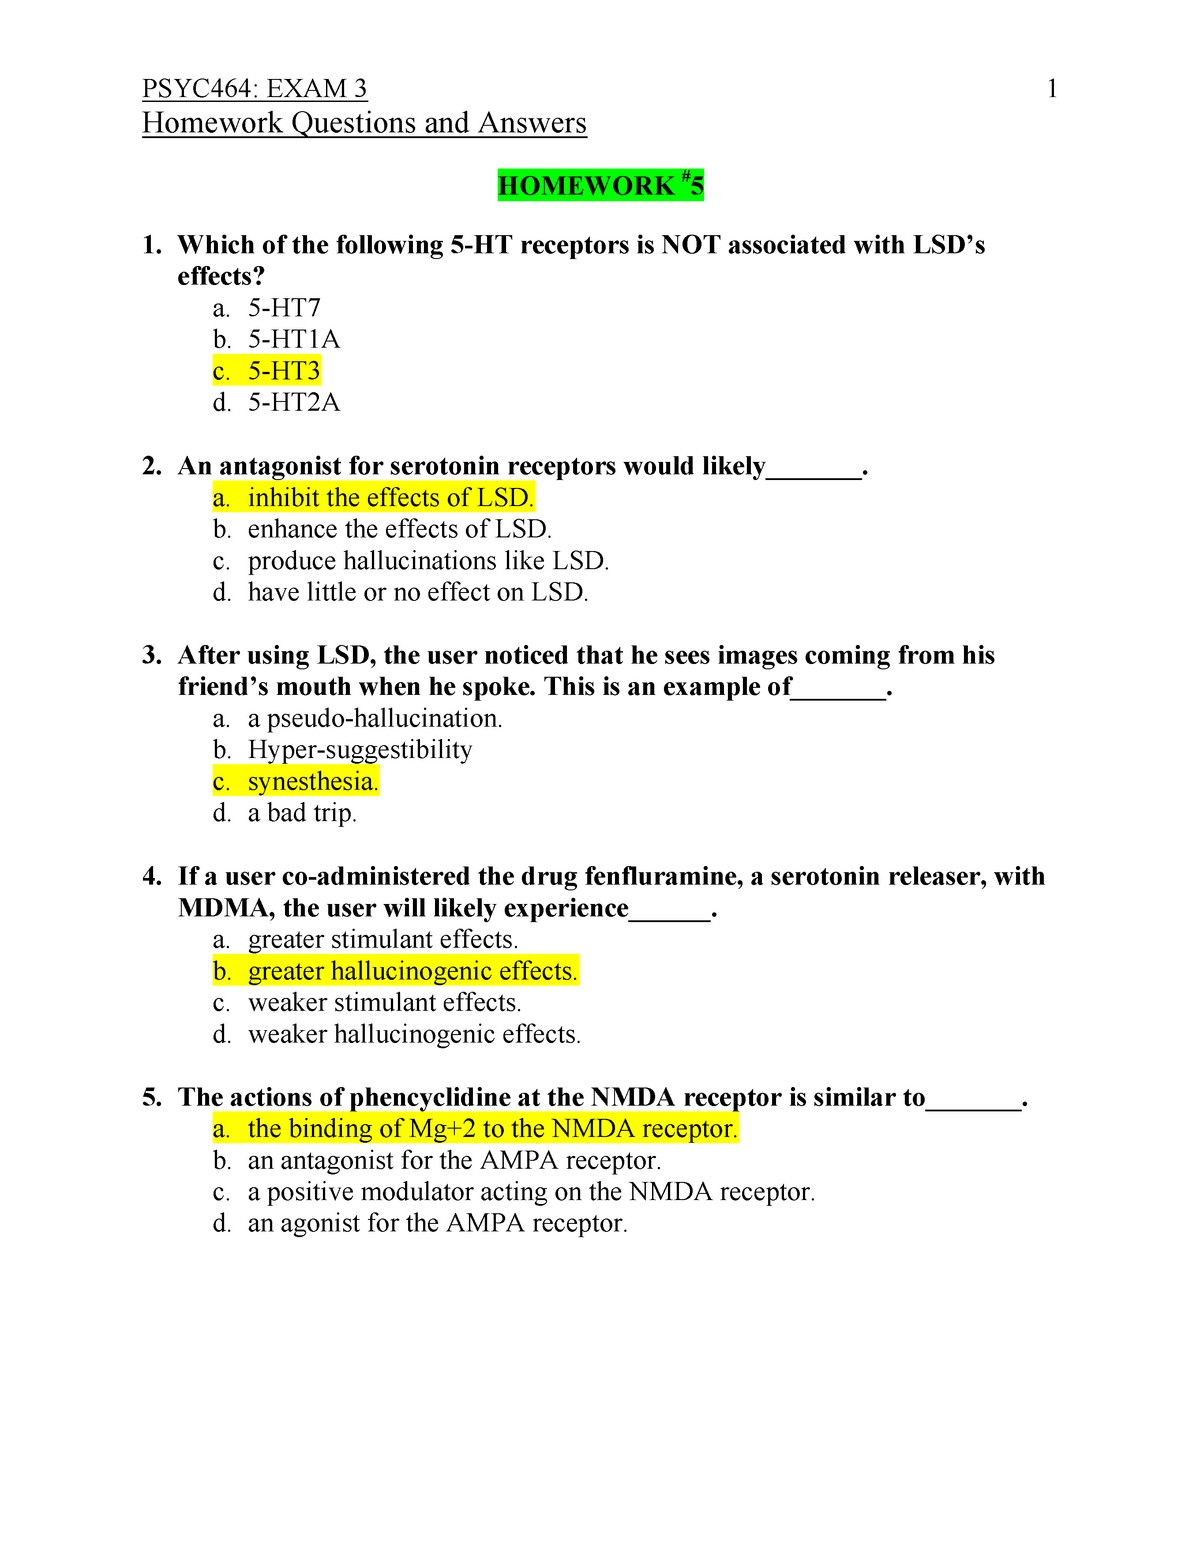 homework questions section 4